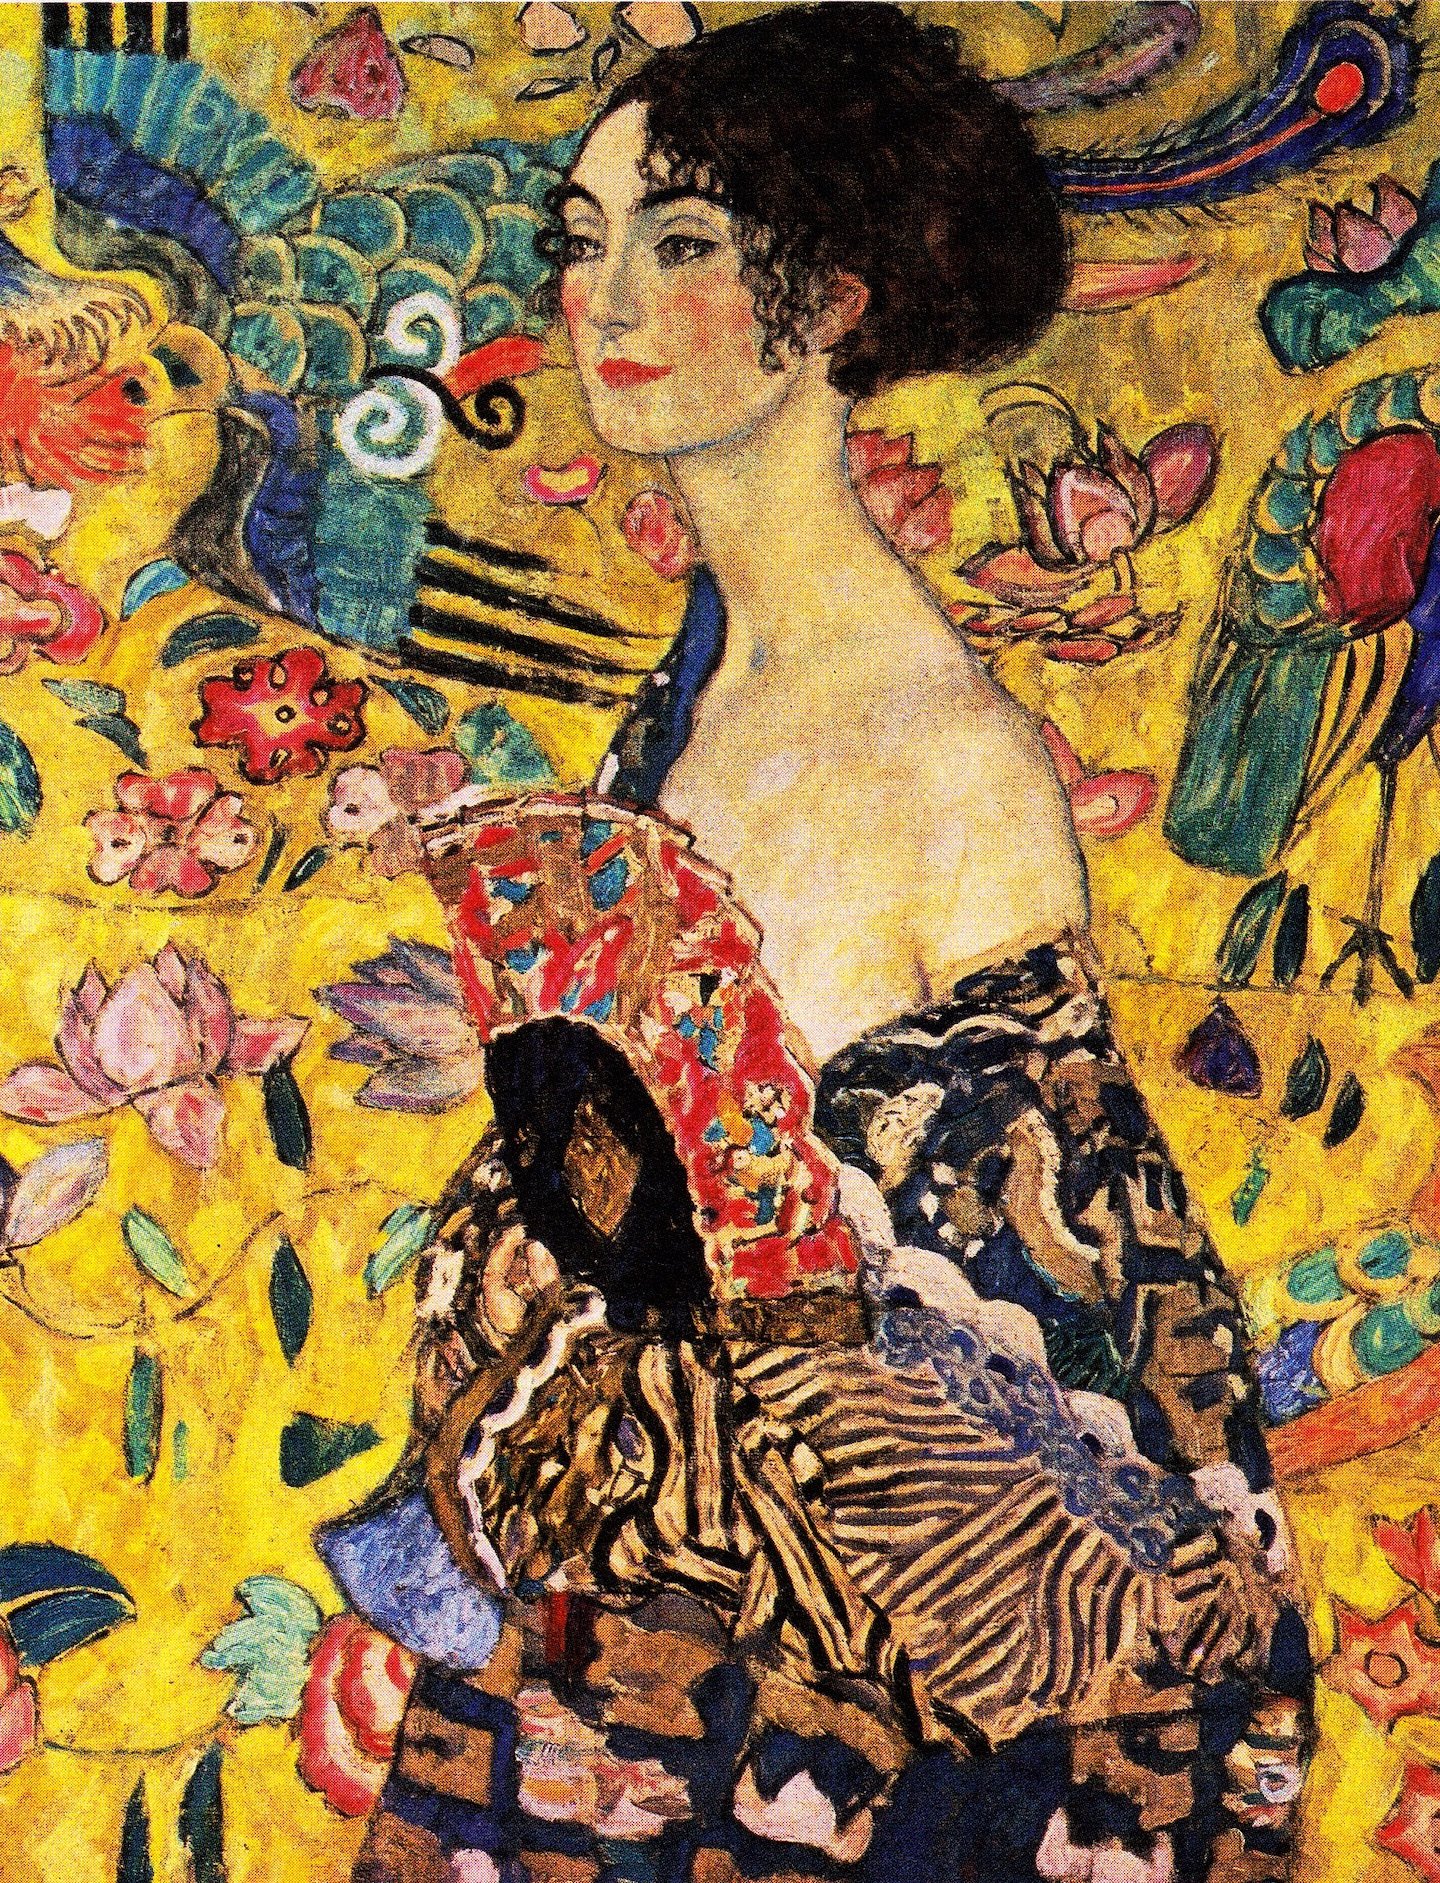 The image is a painting of a woman in a black and gold dress with a fan in her hand. She is standing in front of a yellow background with a pattern of flowers and leaves. The woman has a relaxed expression on her face and is holding the fan in her right hand. The painting is in the style of the Art Nouveau movement.